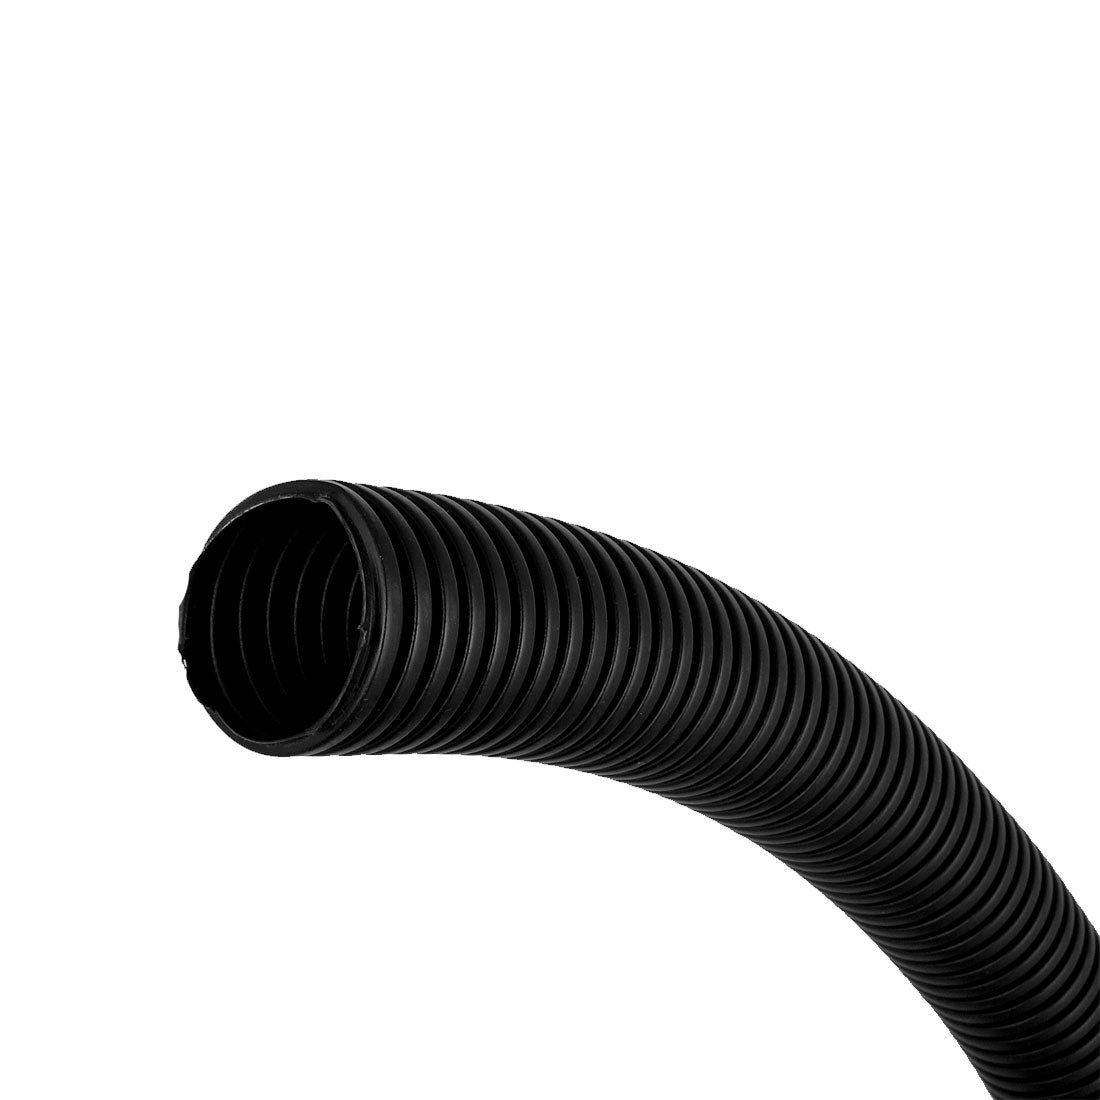 uxcell Uxcell 3.8 M 35 x 42 mm Plastic Corrugated Conduit Tube for Garden,Office Black